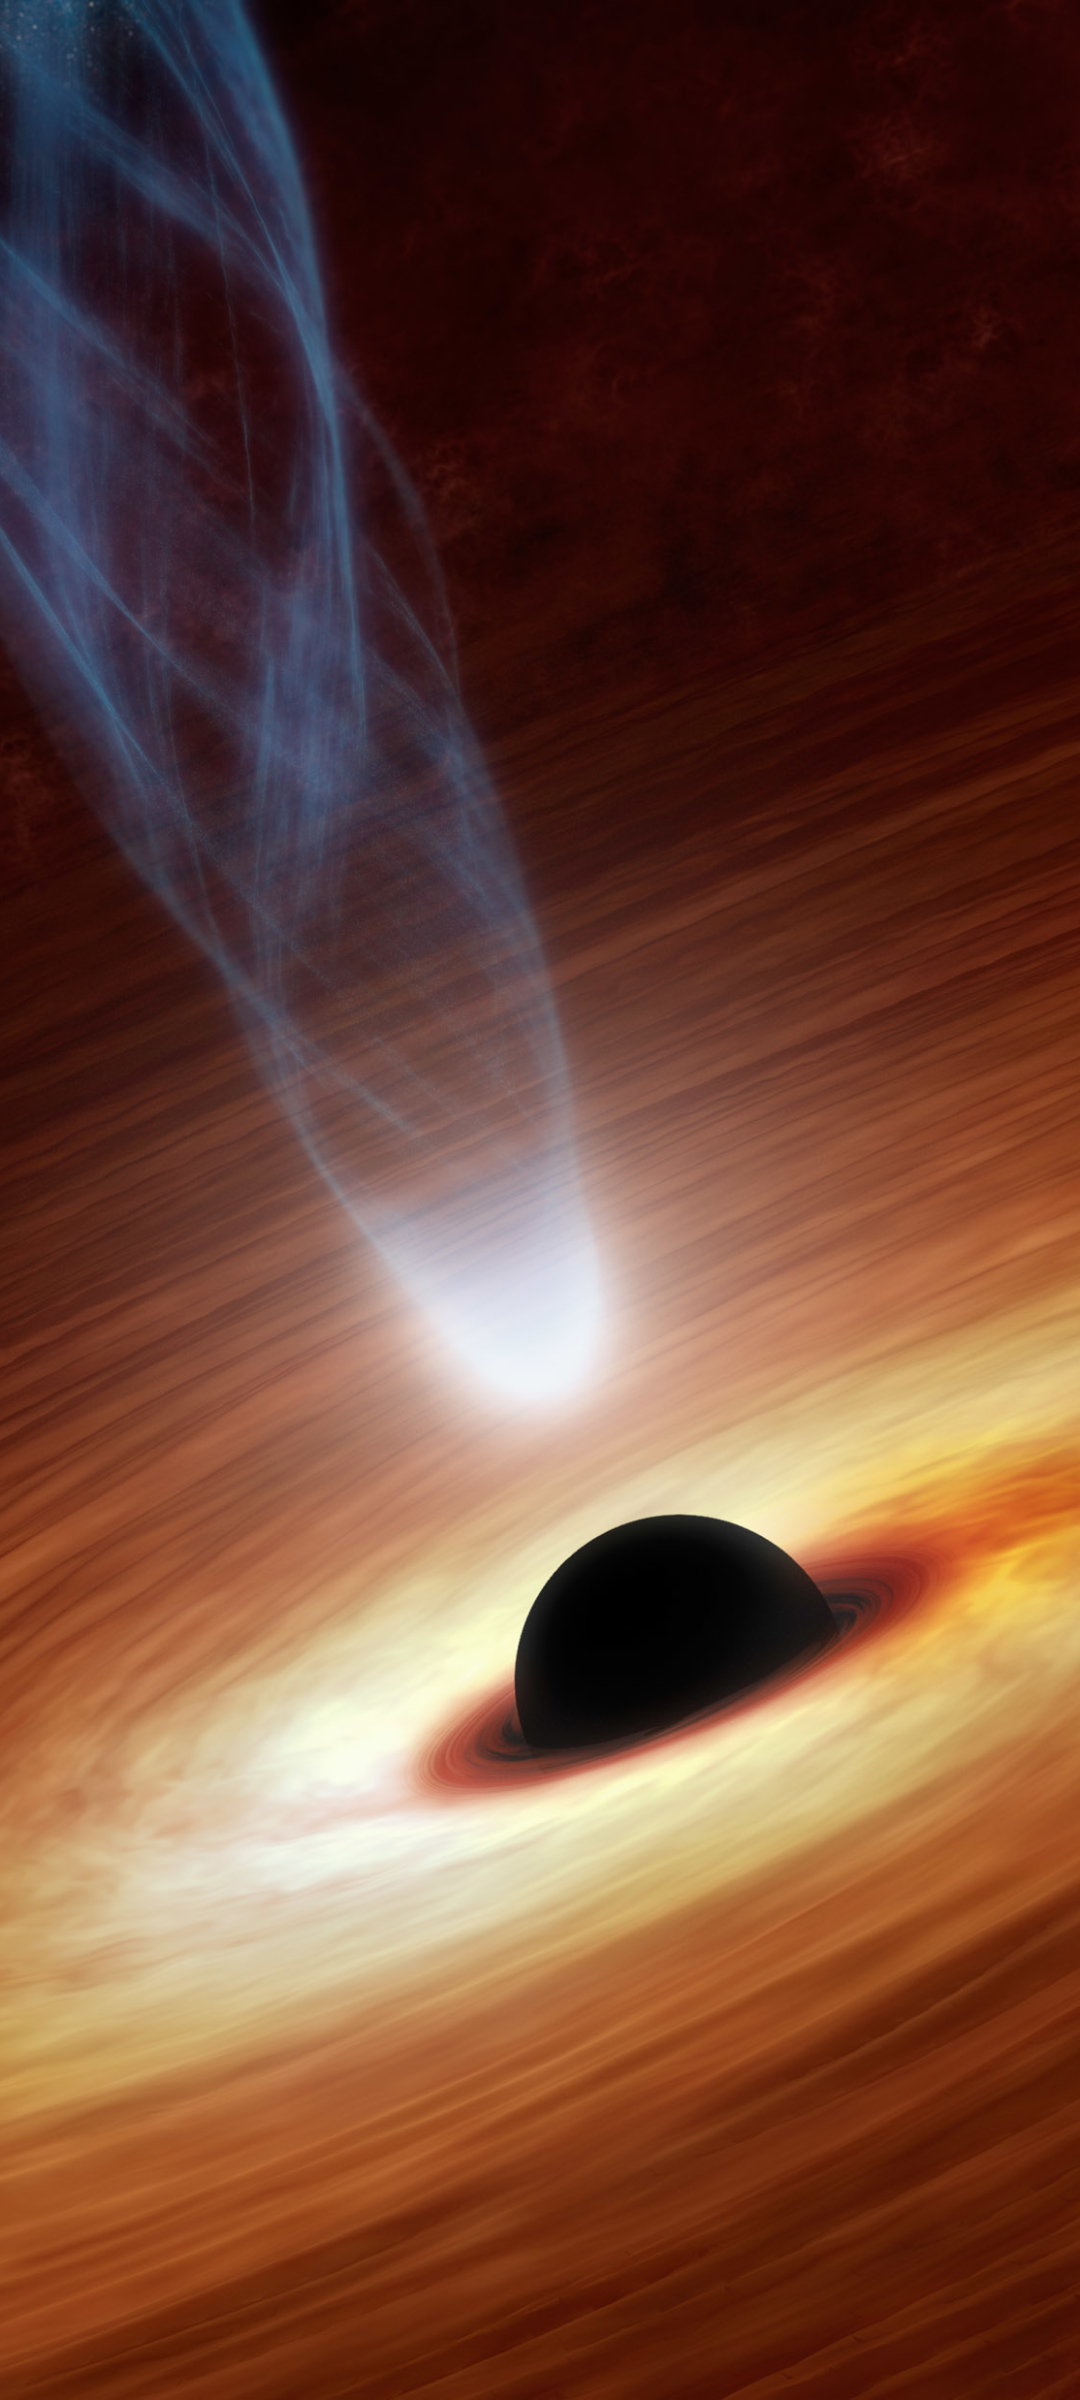 Download wallpaper 1280x2120 space colorful dark black hole planet  iphone 6 plus 1280x2120 hd background 16091